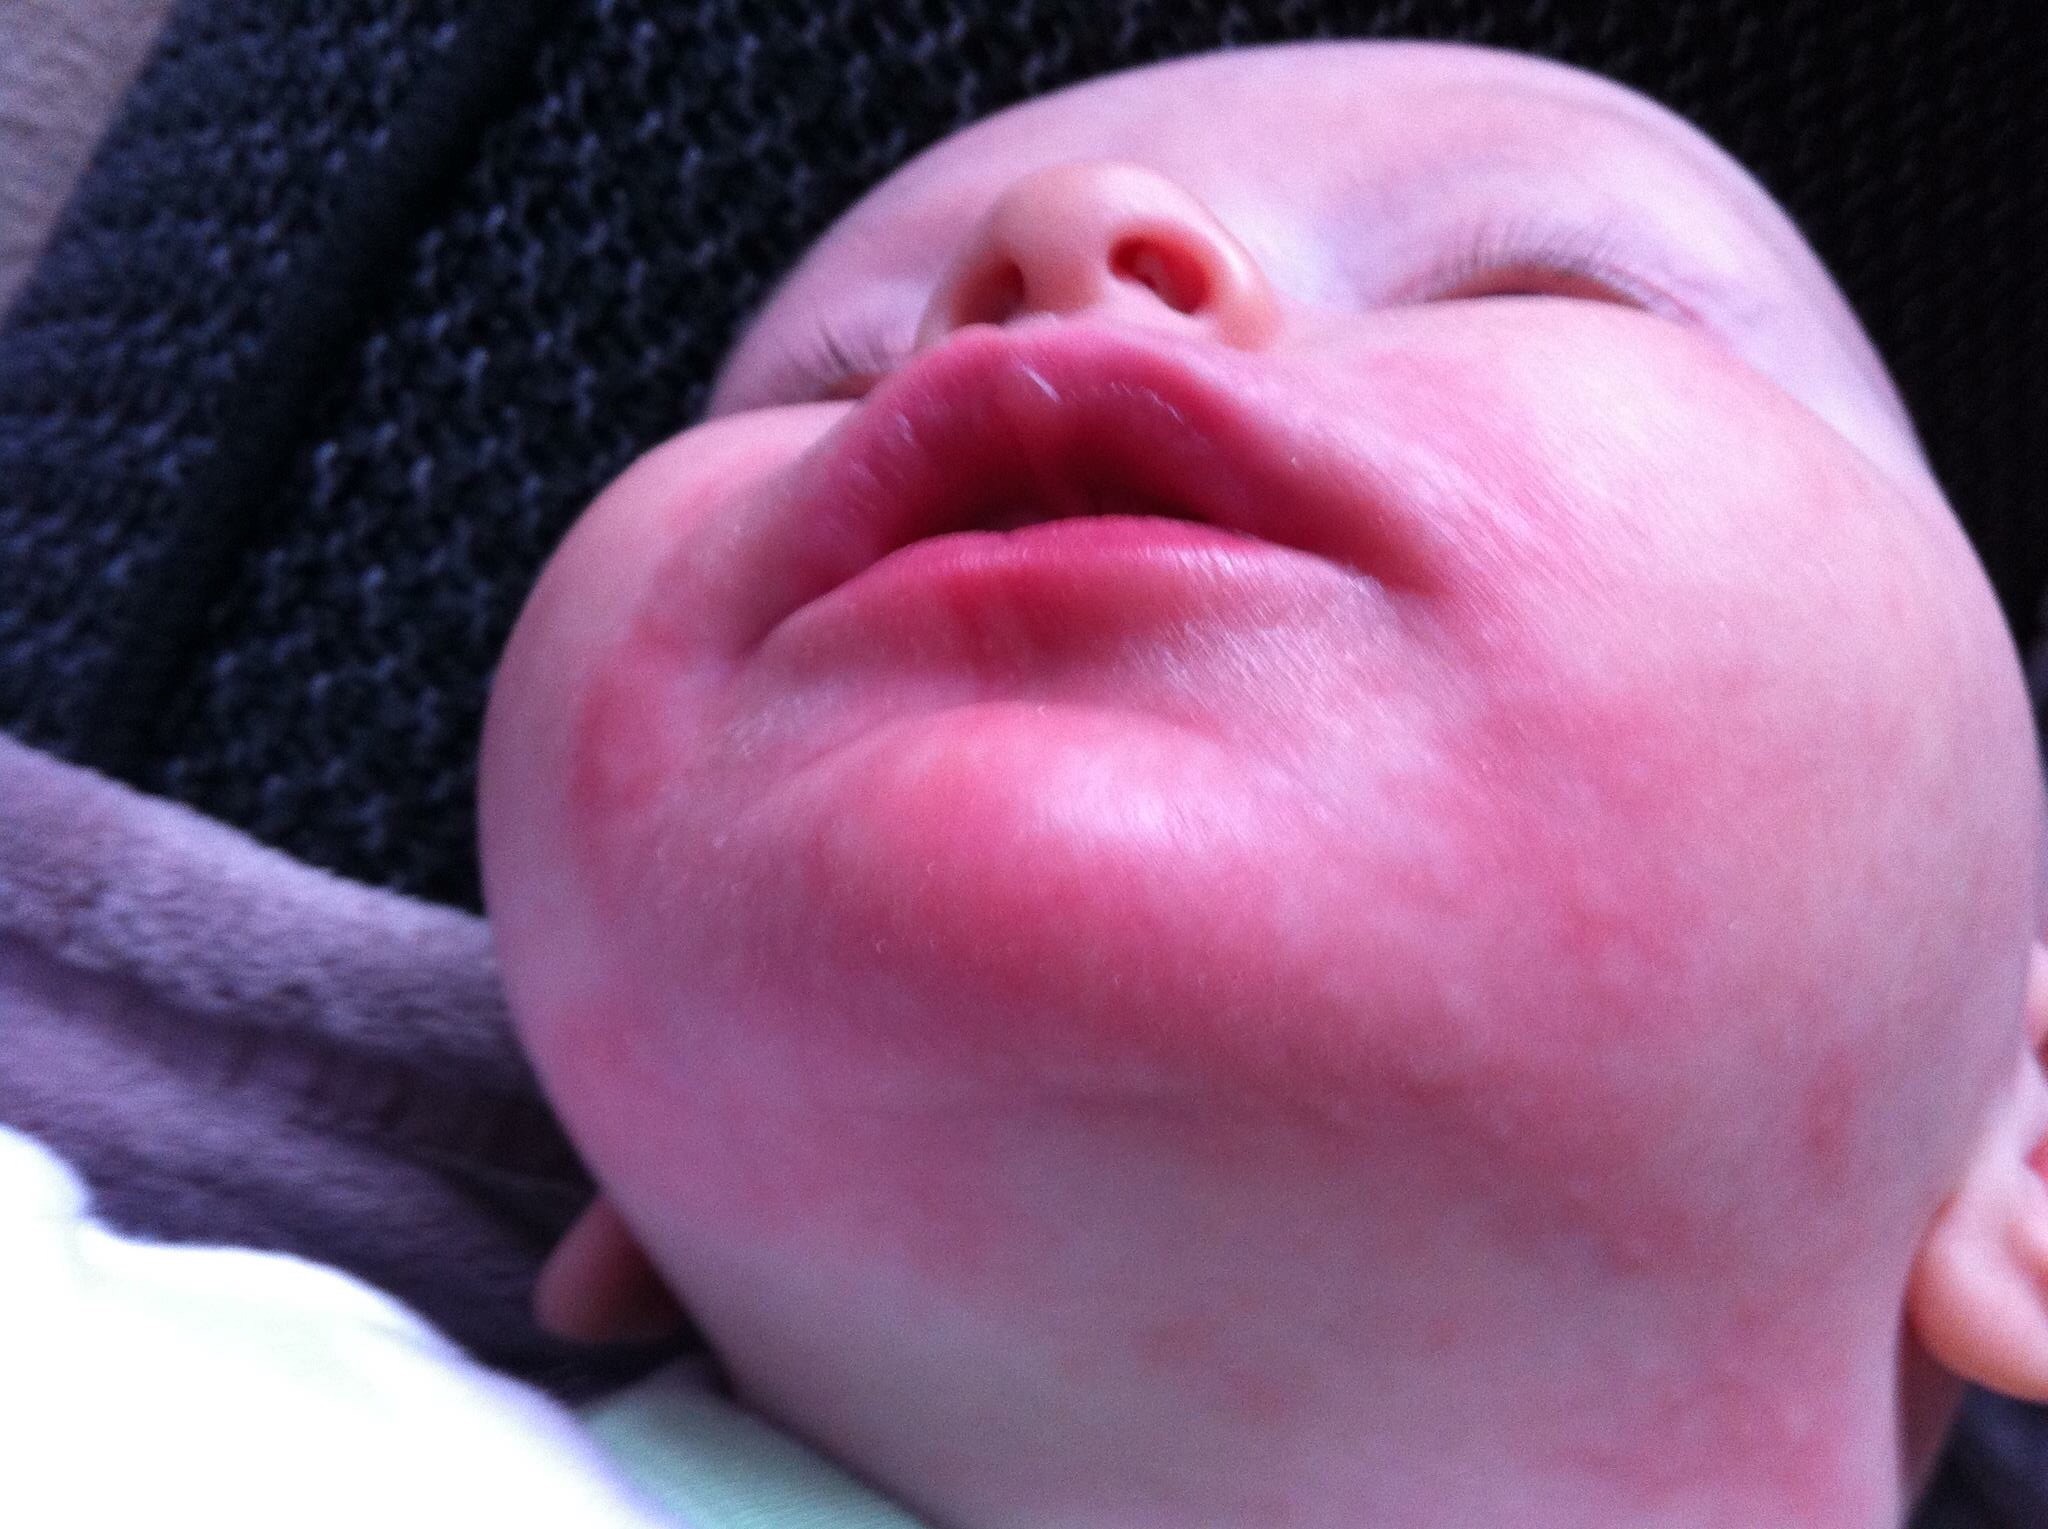 cmpa allergic reaction on a baby - swollen face covered in red hives, looks scalded 